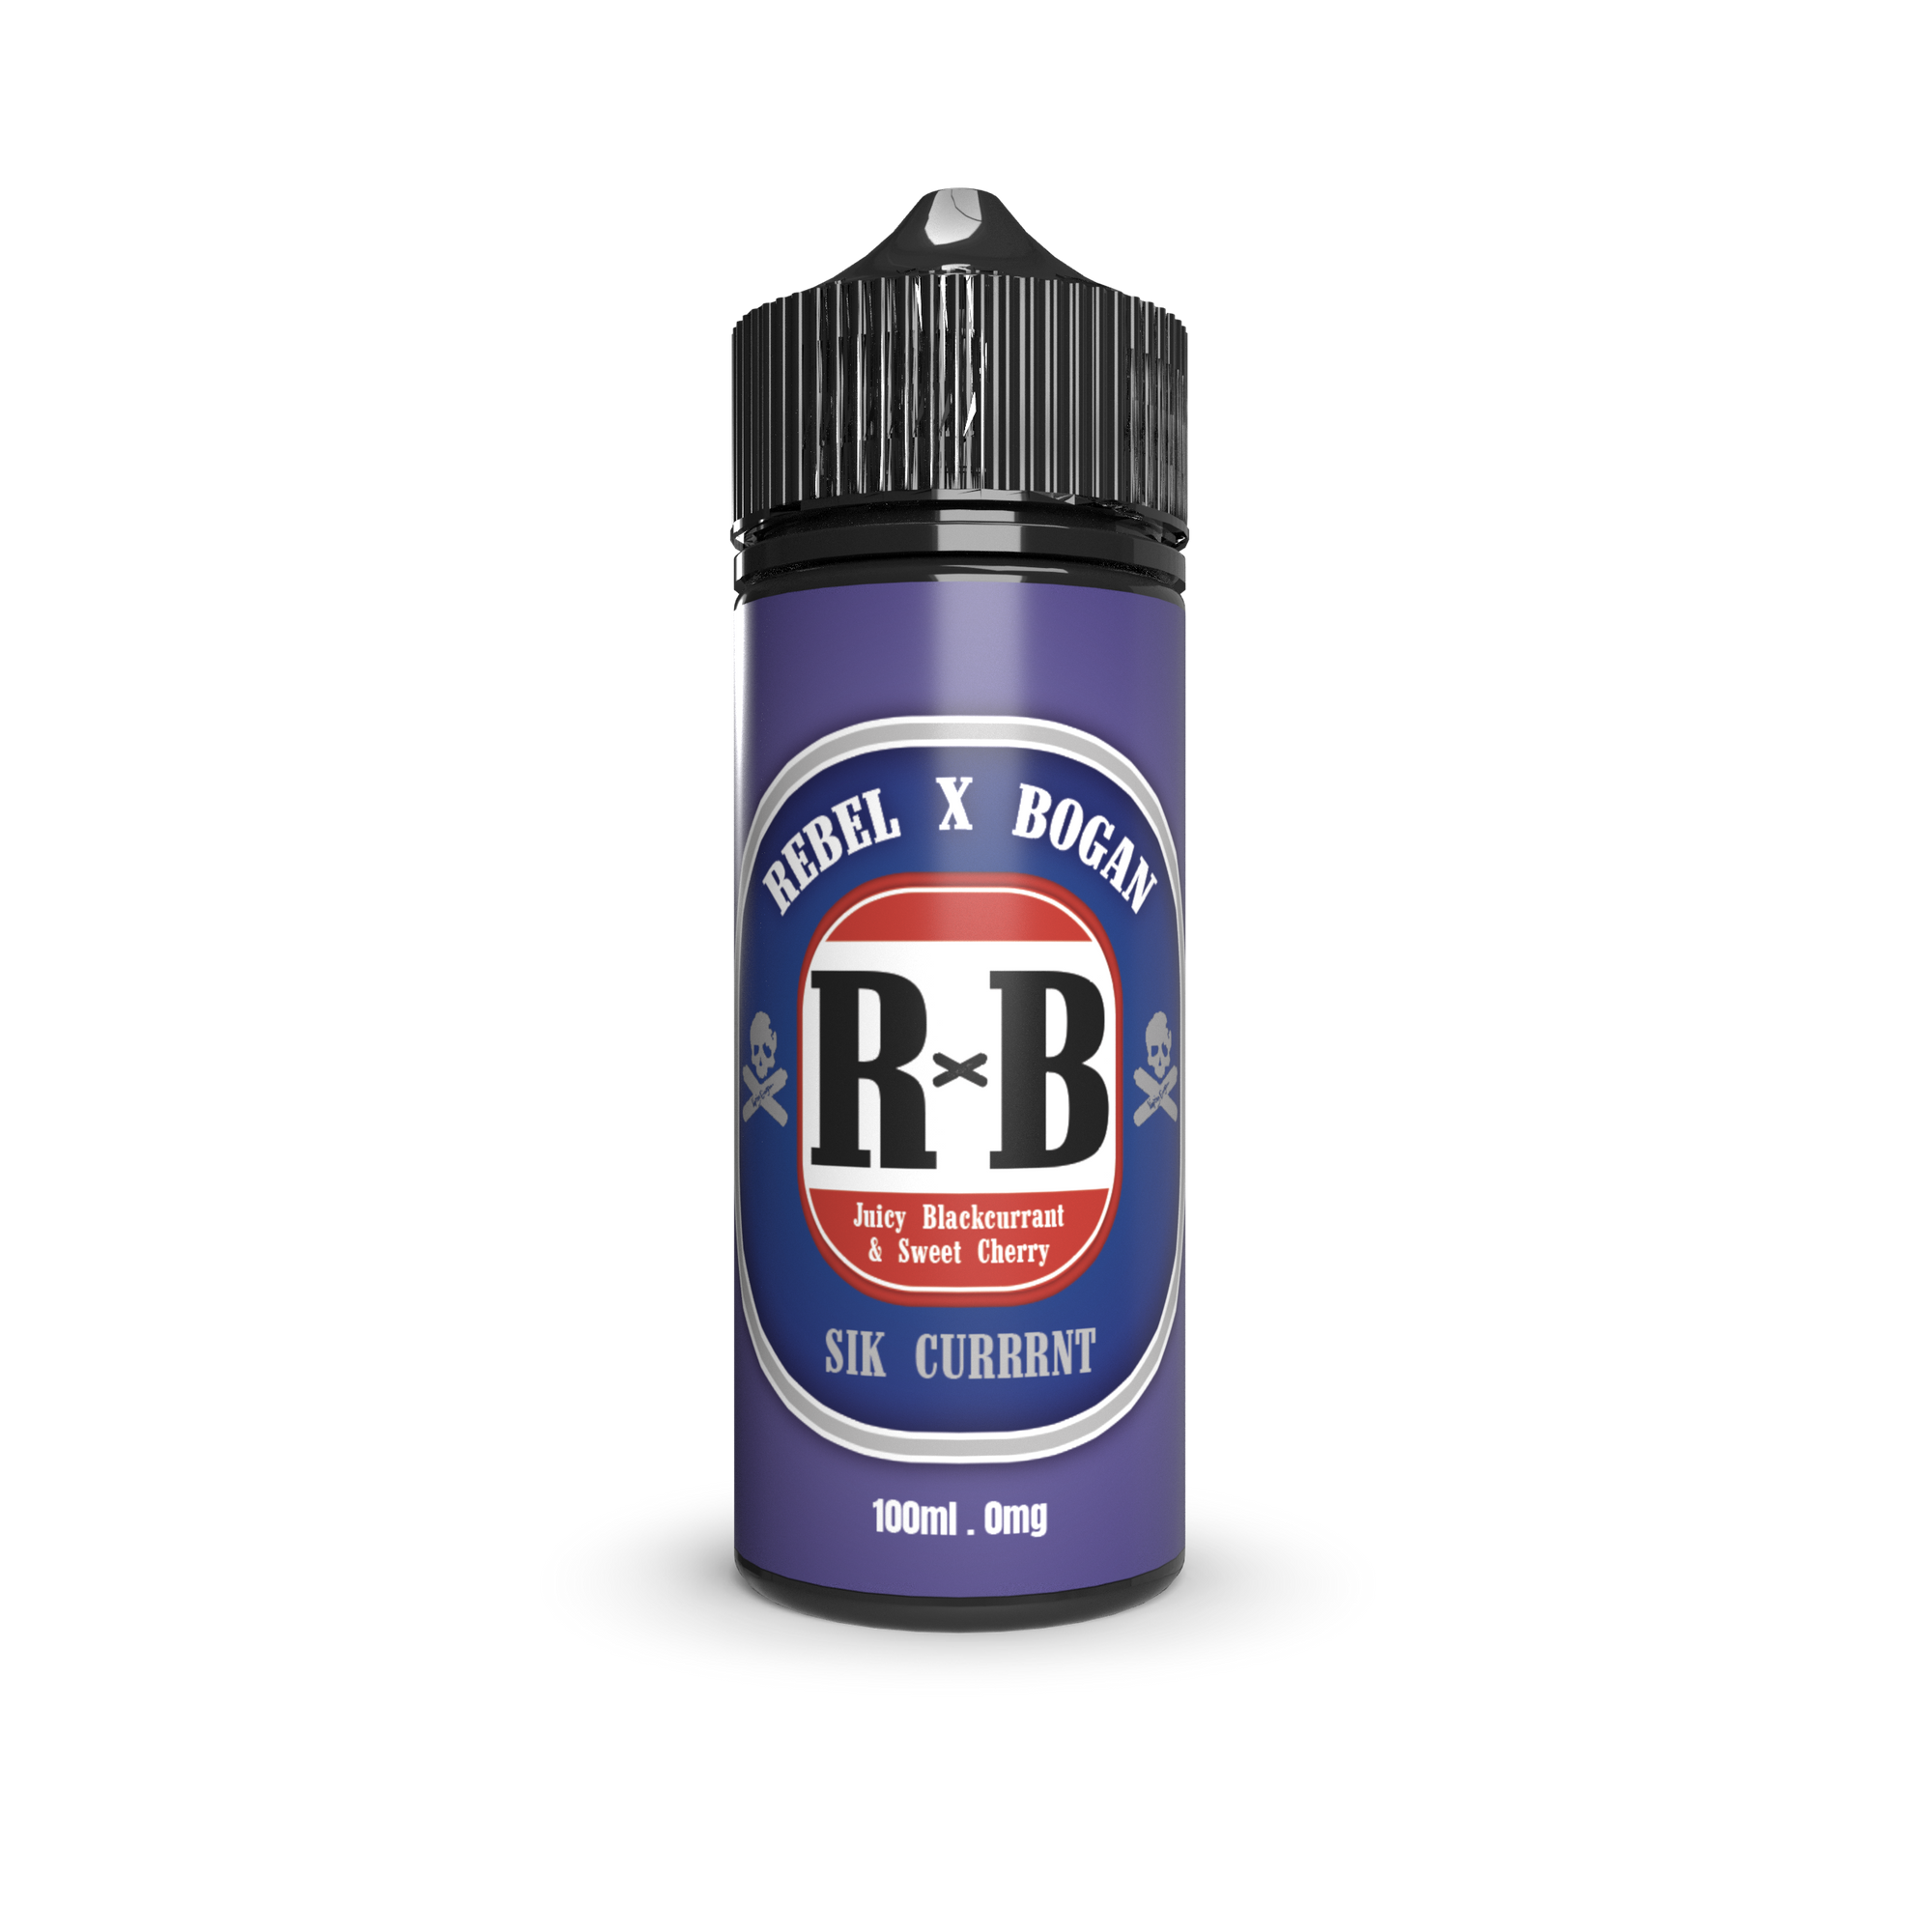 Buy Sik Currrnt By Rebel and Bogan - Wick and Wire Co Melbourne Vape Shop, Victoria Australia